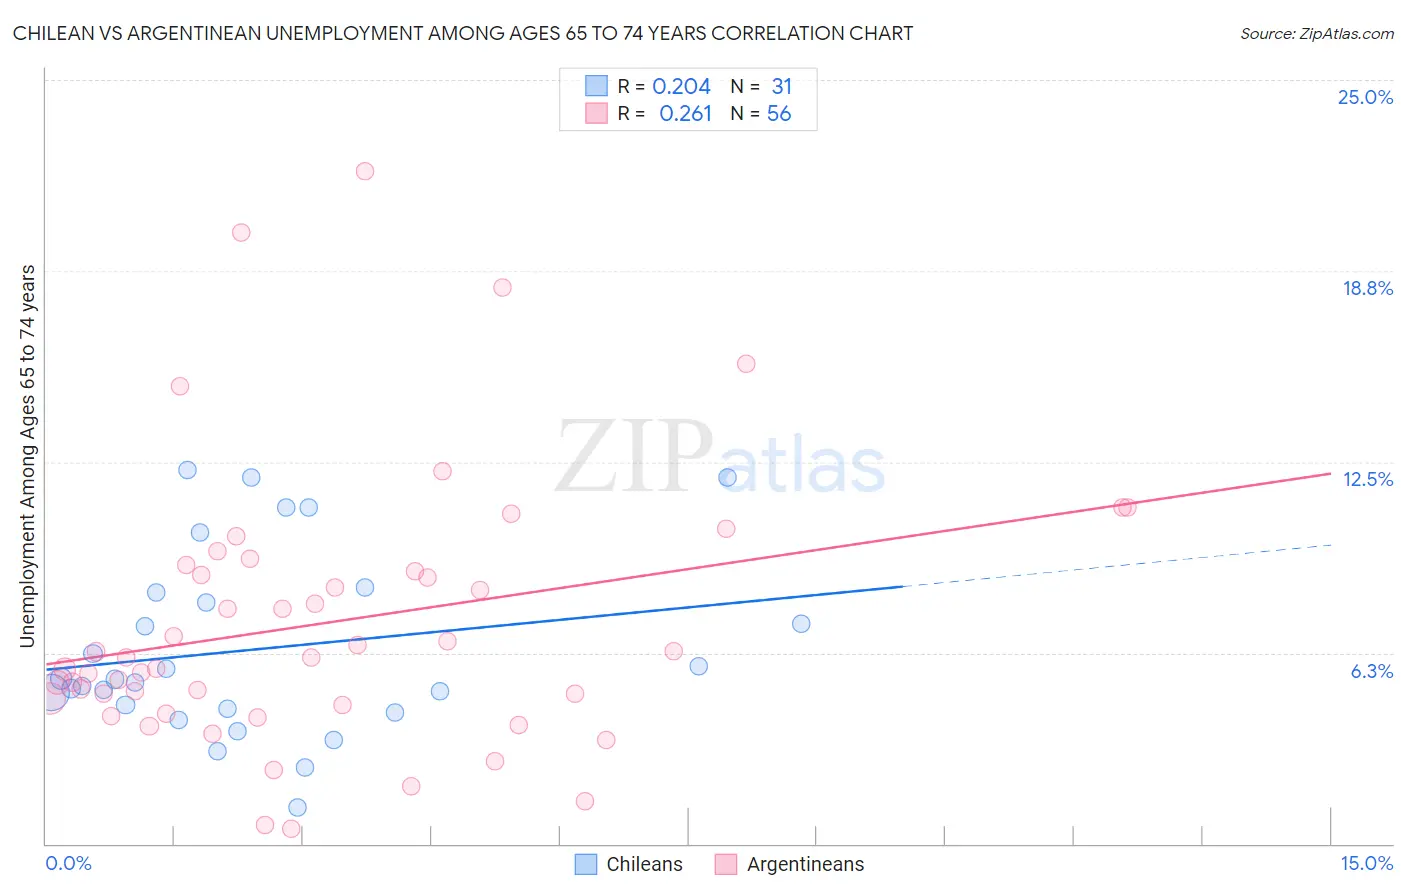 Chilean vs Argentinean Unemployment Among Ages 65 to 74 years